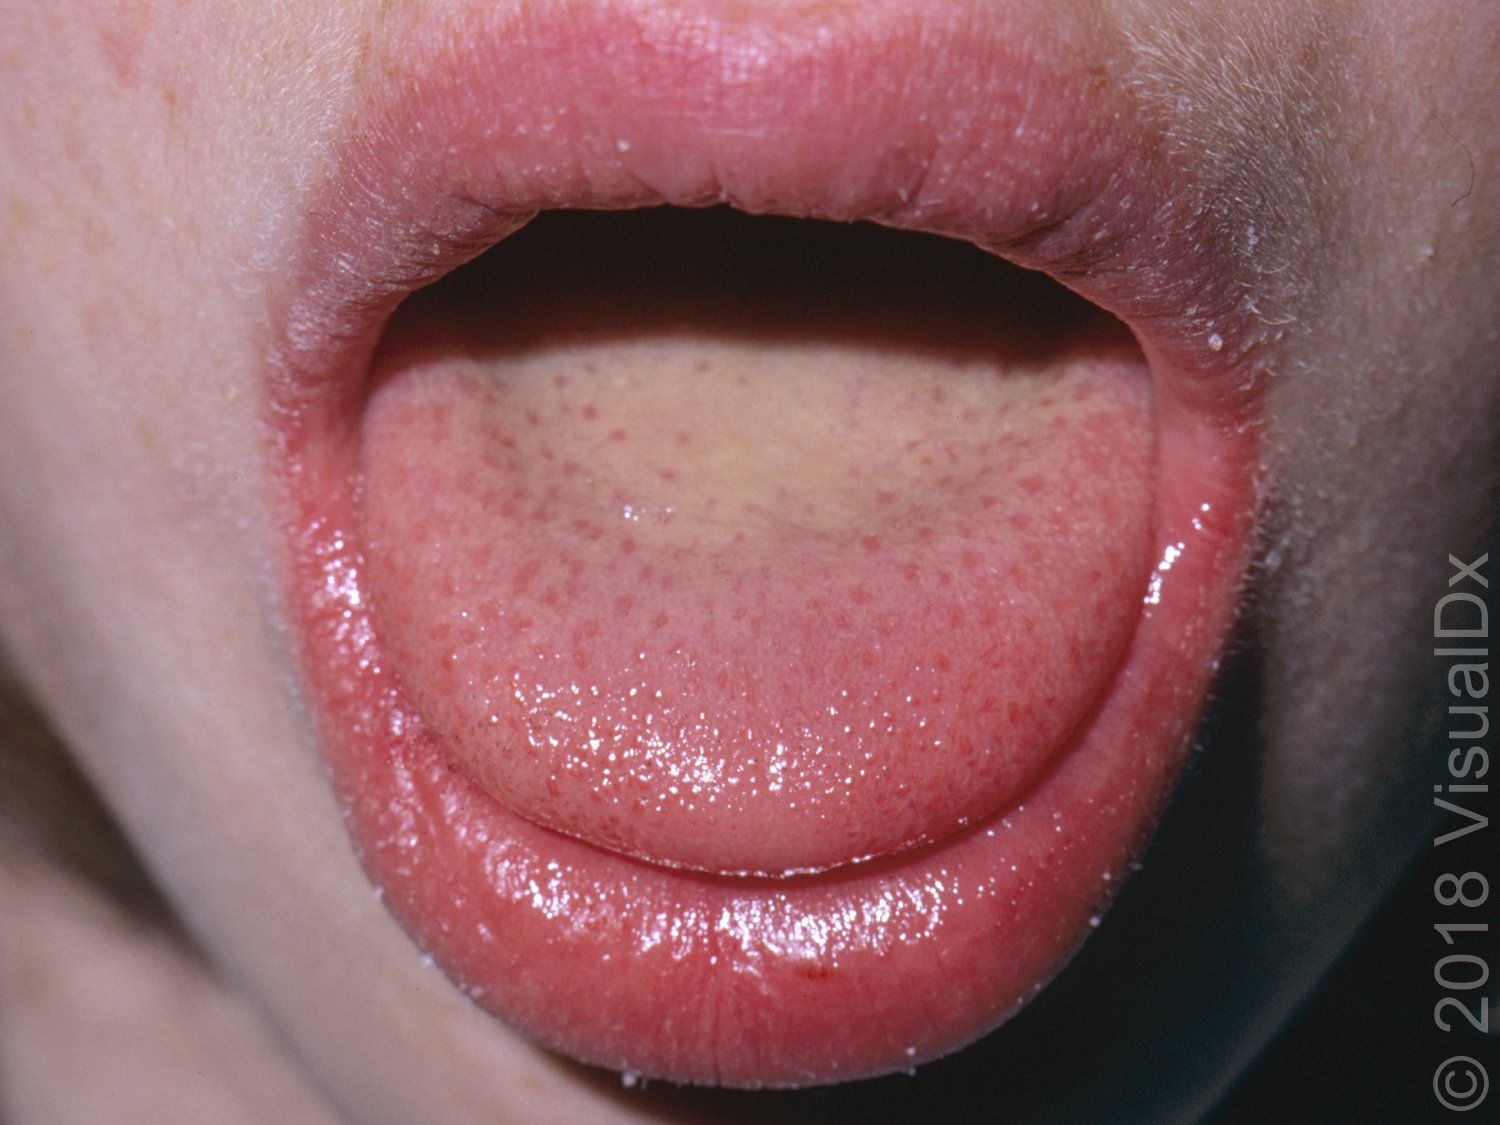 Image IQ: An 8-year-old girl with a sore throat, deep red tongue, fever and a petechial rash.